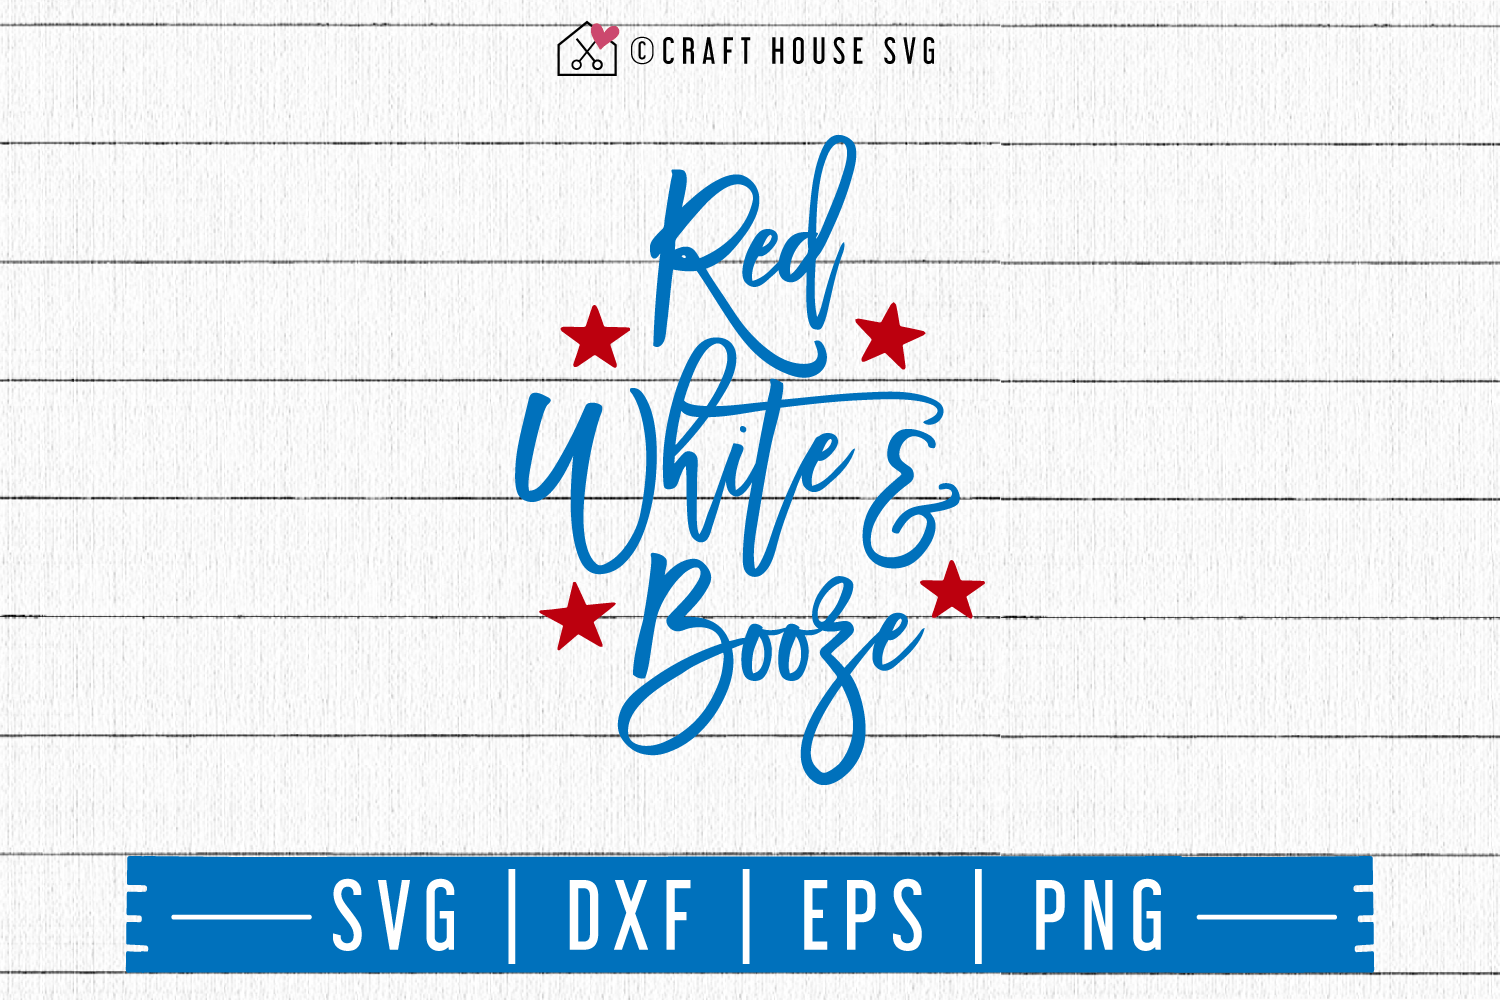 4th of July SVG file | Red white and booze SVG Craft House SVG - SVG files for Cricut and Silhouette